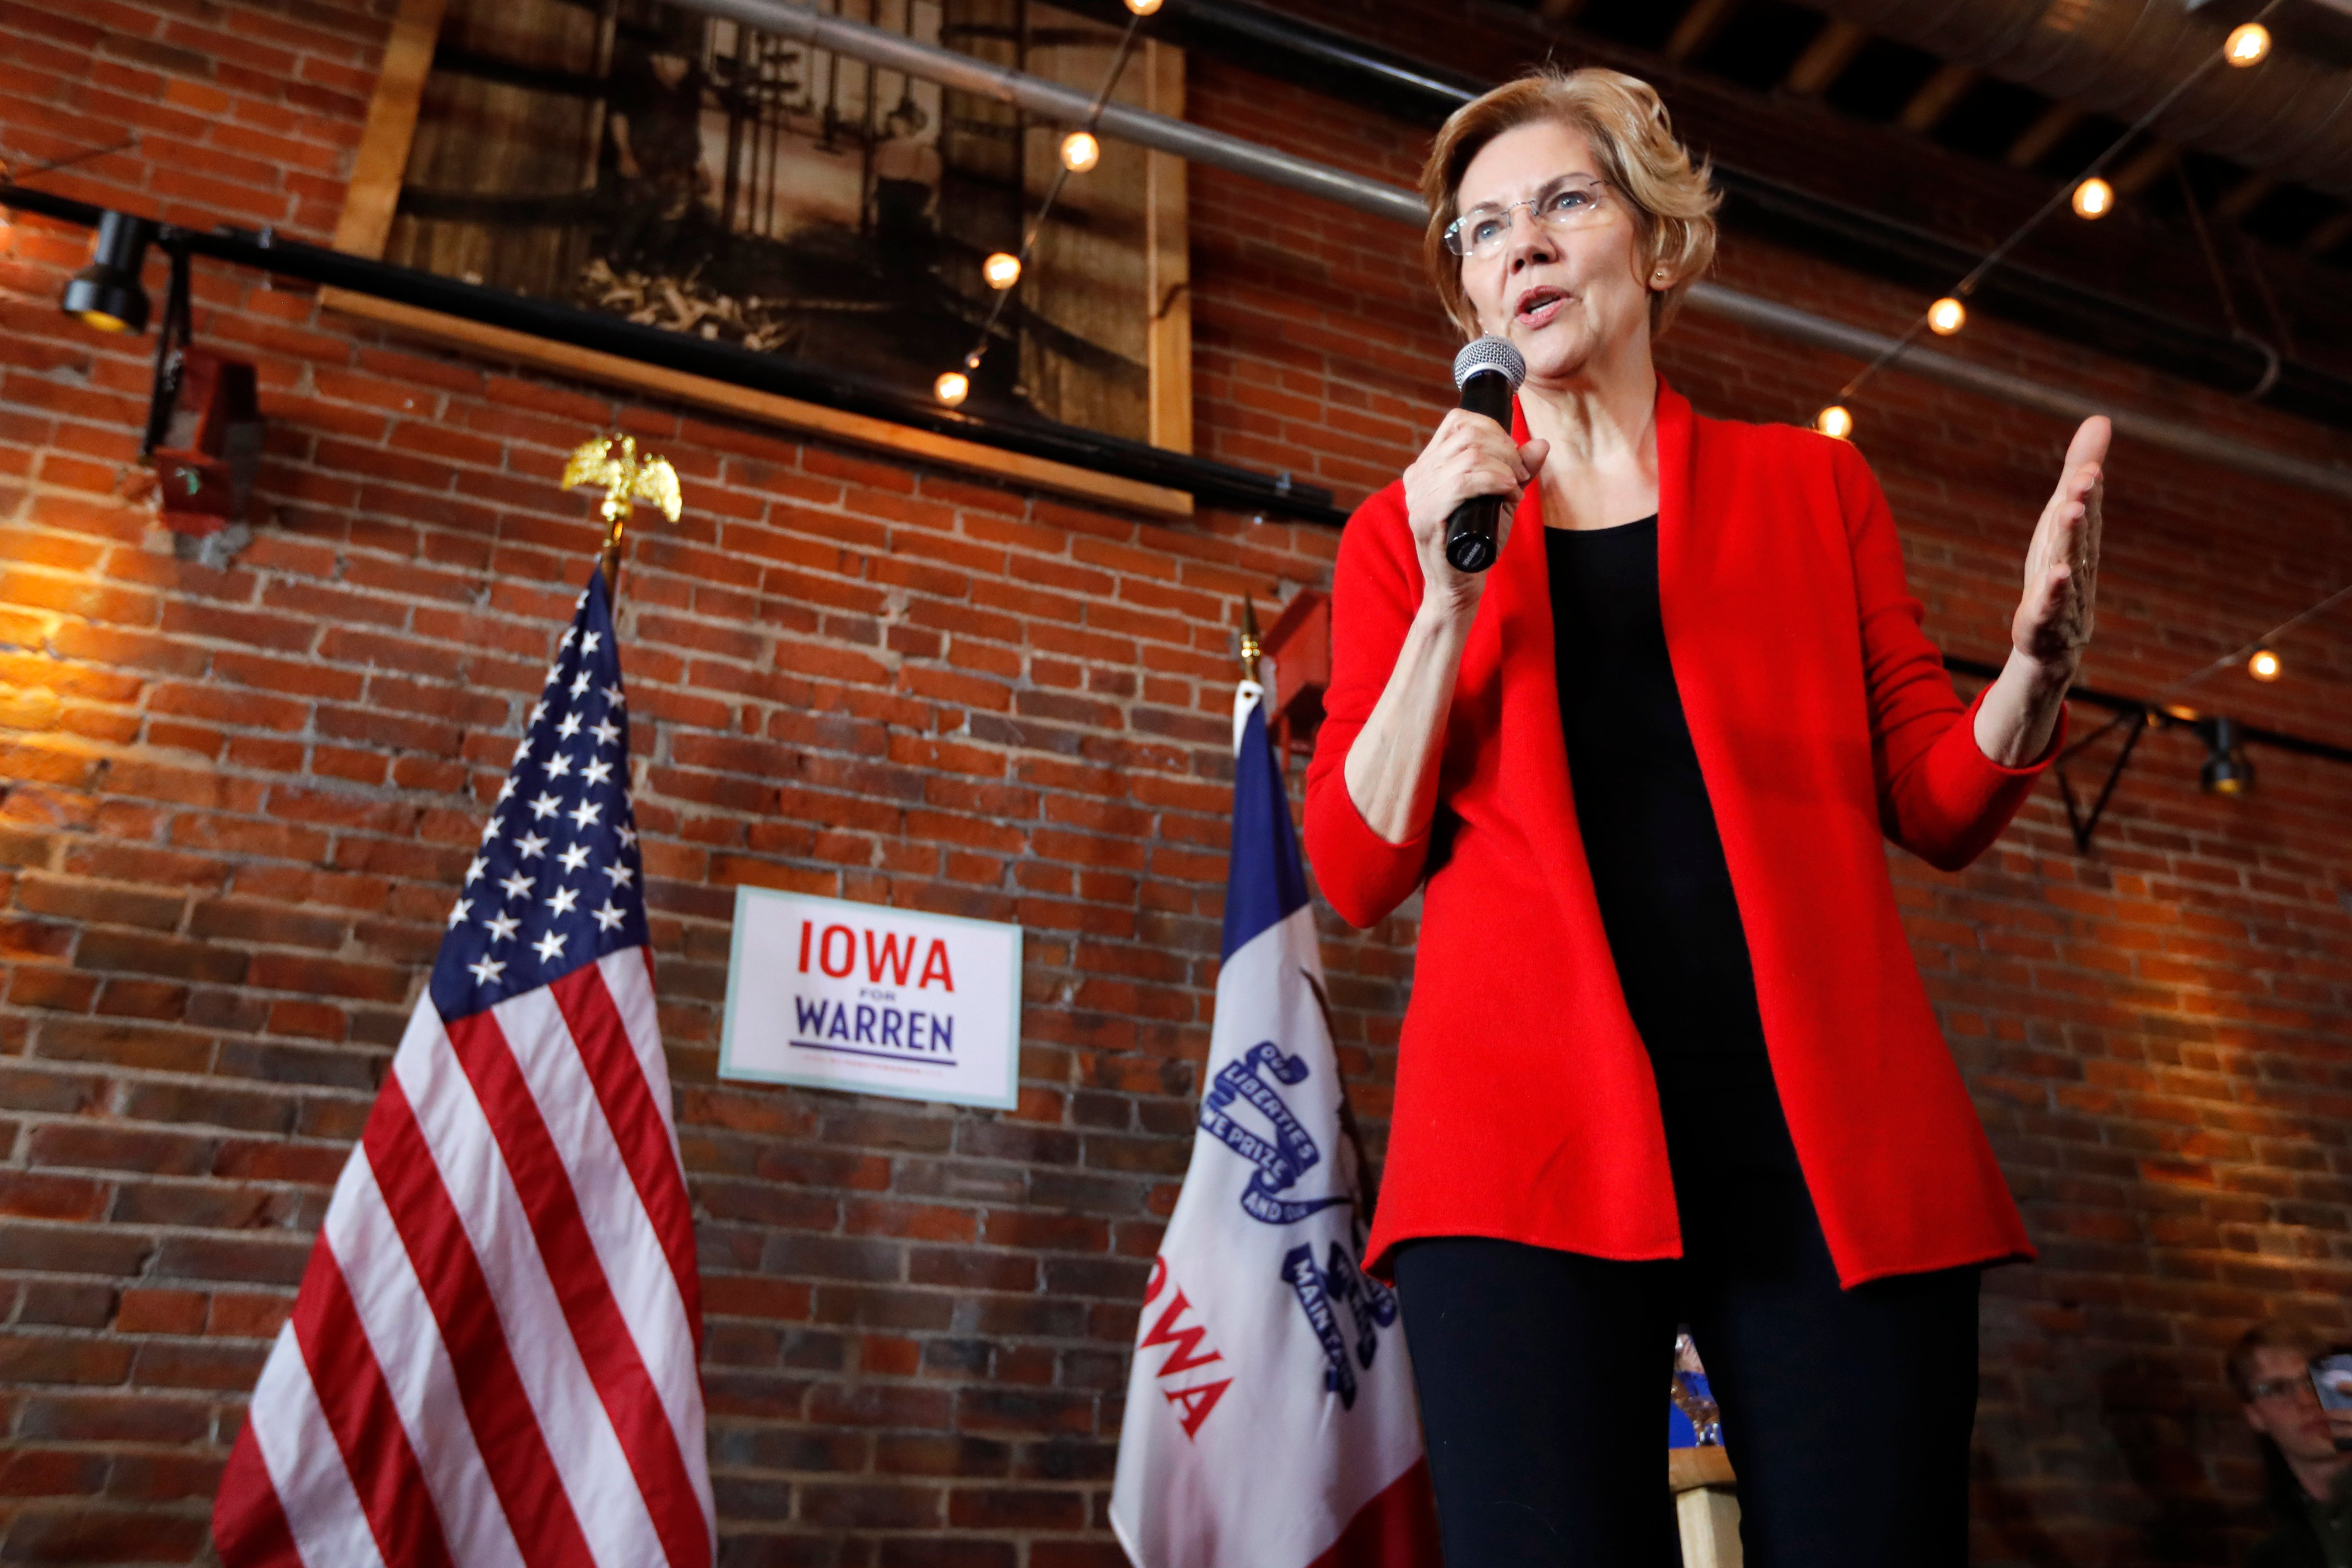 Democratic presidential candidate Elizabeth Warren is proposing to break up the large tech companies like Amazon, Google and Facebook